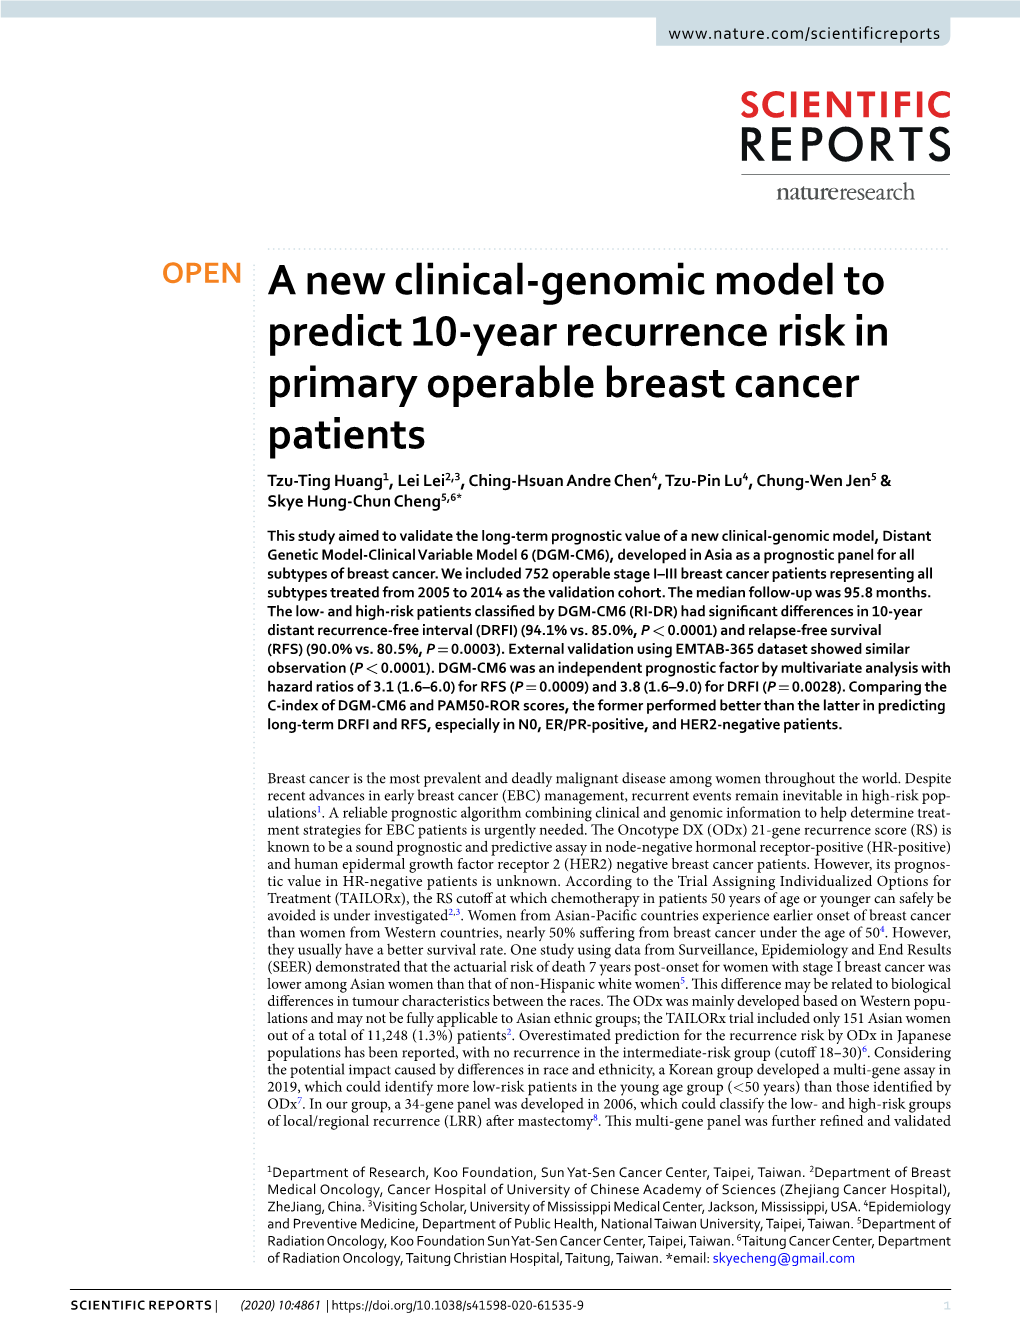 A New Clinical-Genomic Model to Predict 10-Year Recurrence Risk in Primary Operable Breast Cancer Patients